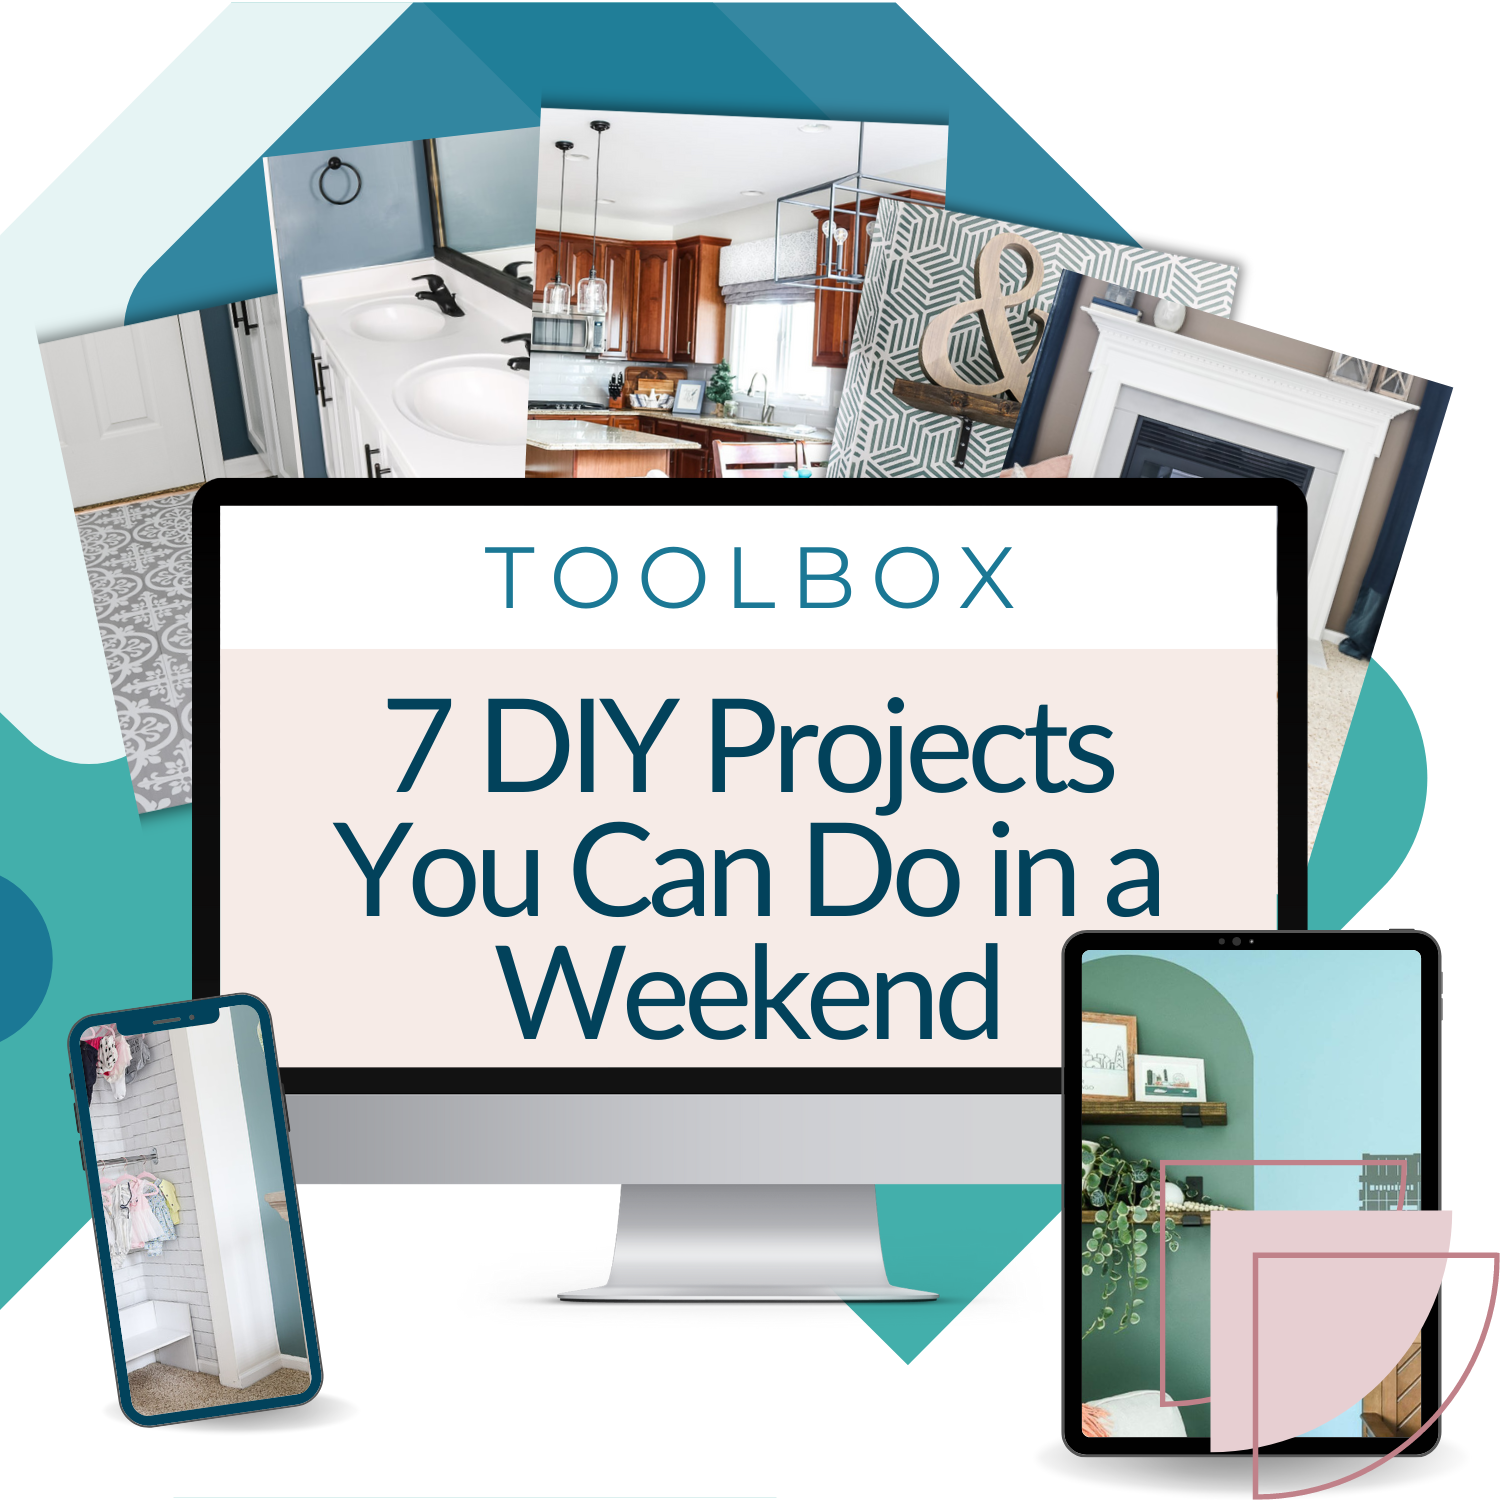 7 My Homier Home DIY Projects You Can Do in a Weekend